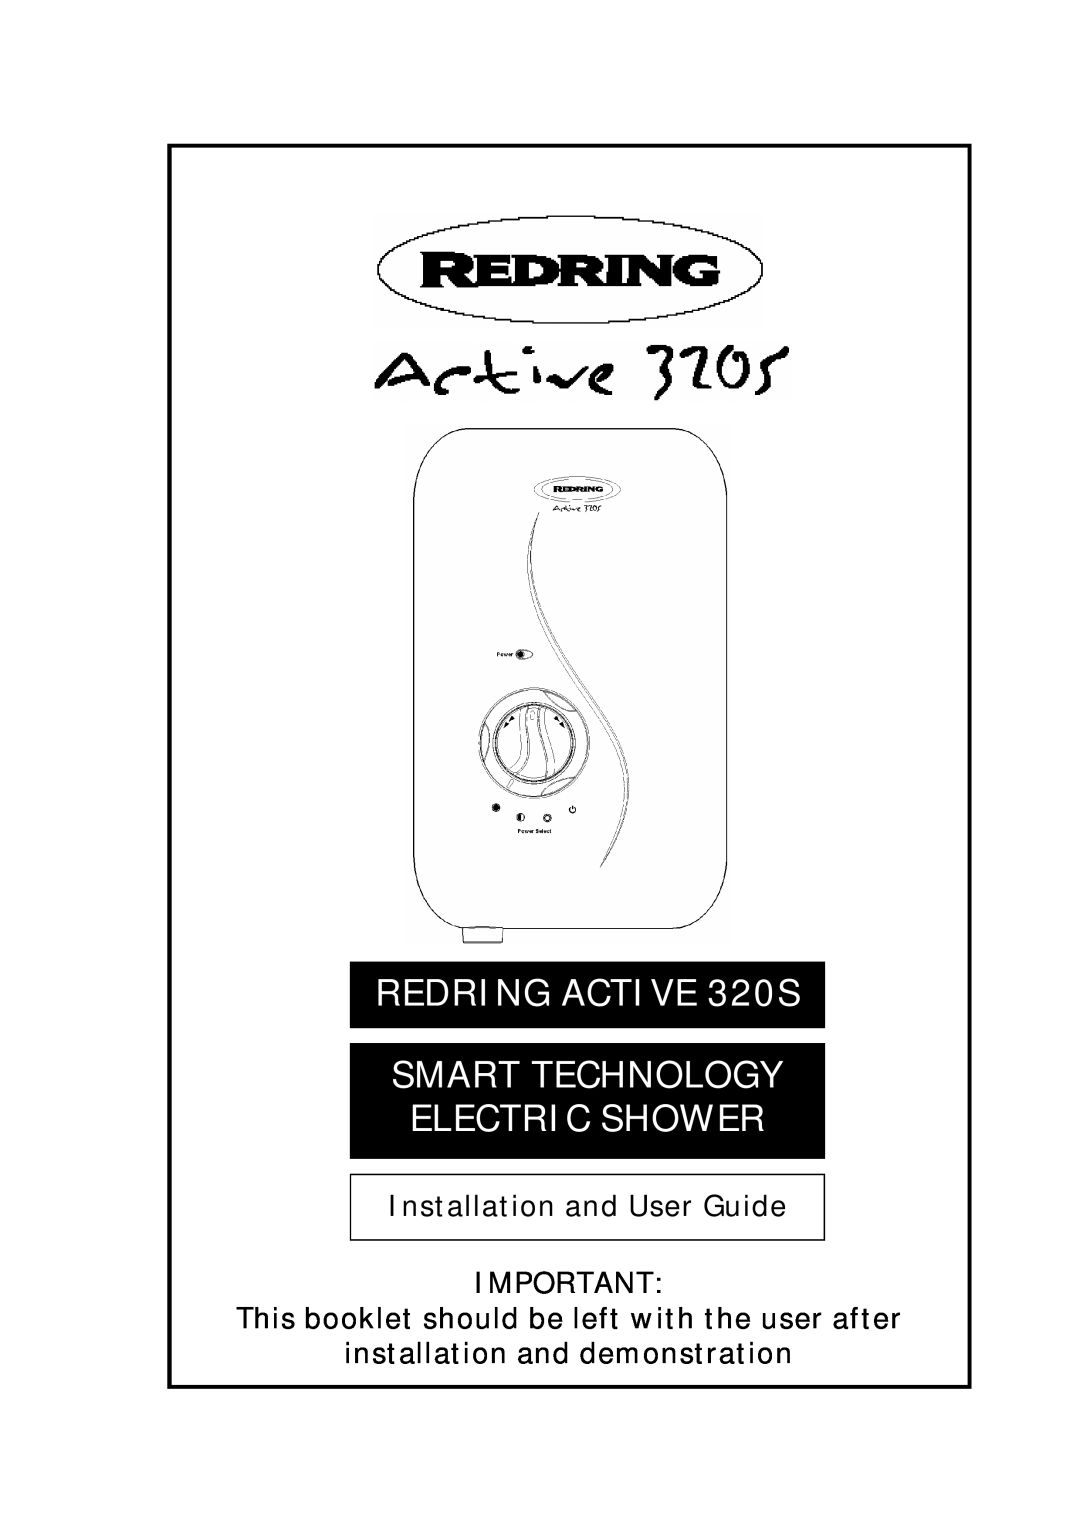 Redring manual REDRING ACTIVE 320S SMART TECHNOLOGY, Electric Shower, Installation and User Guide 